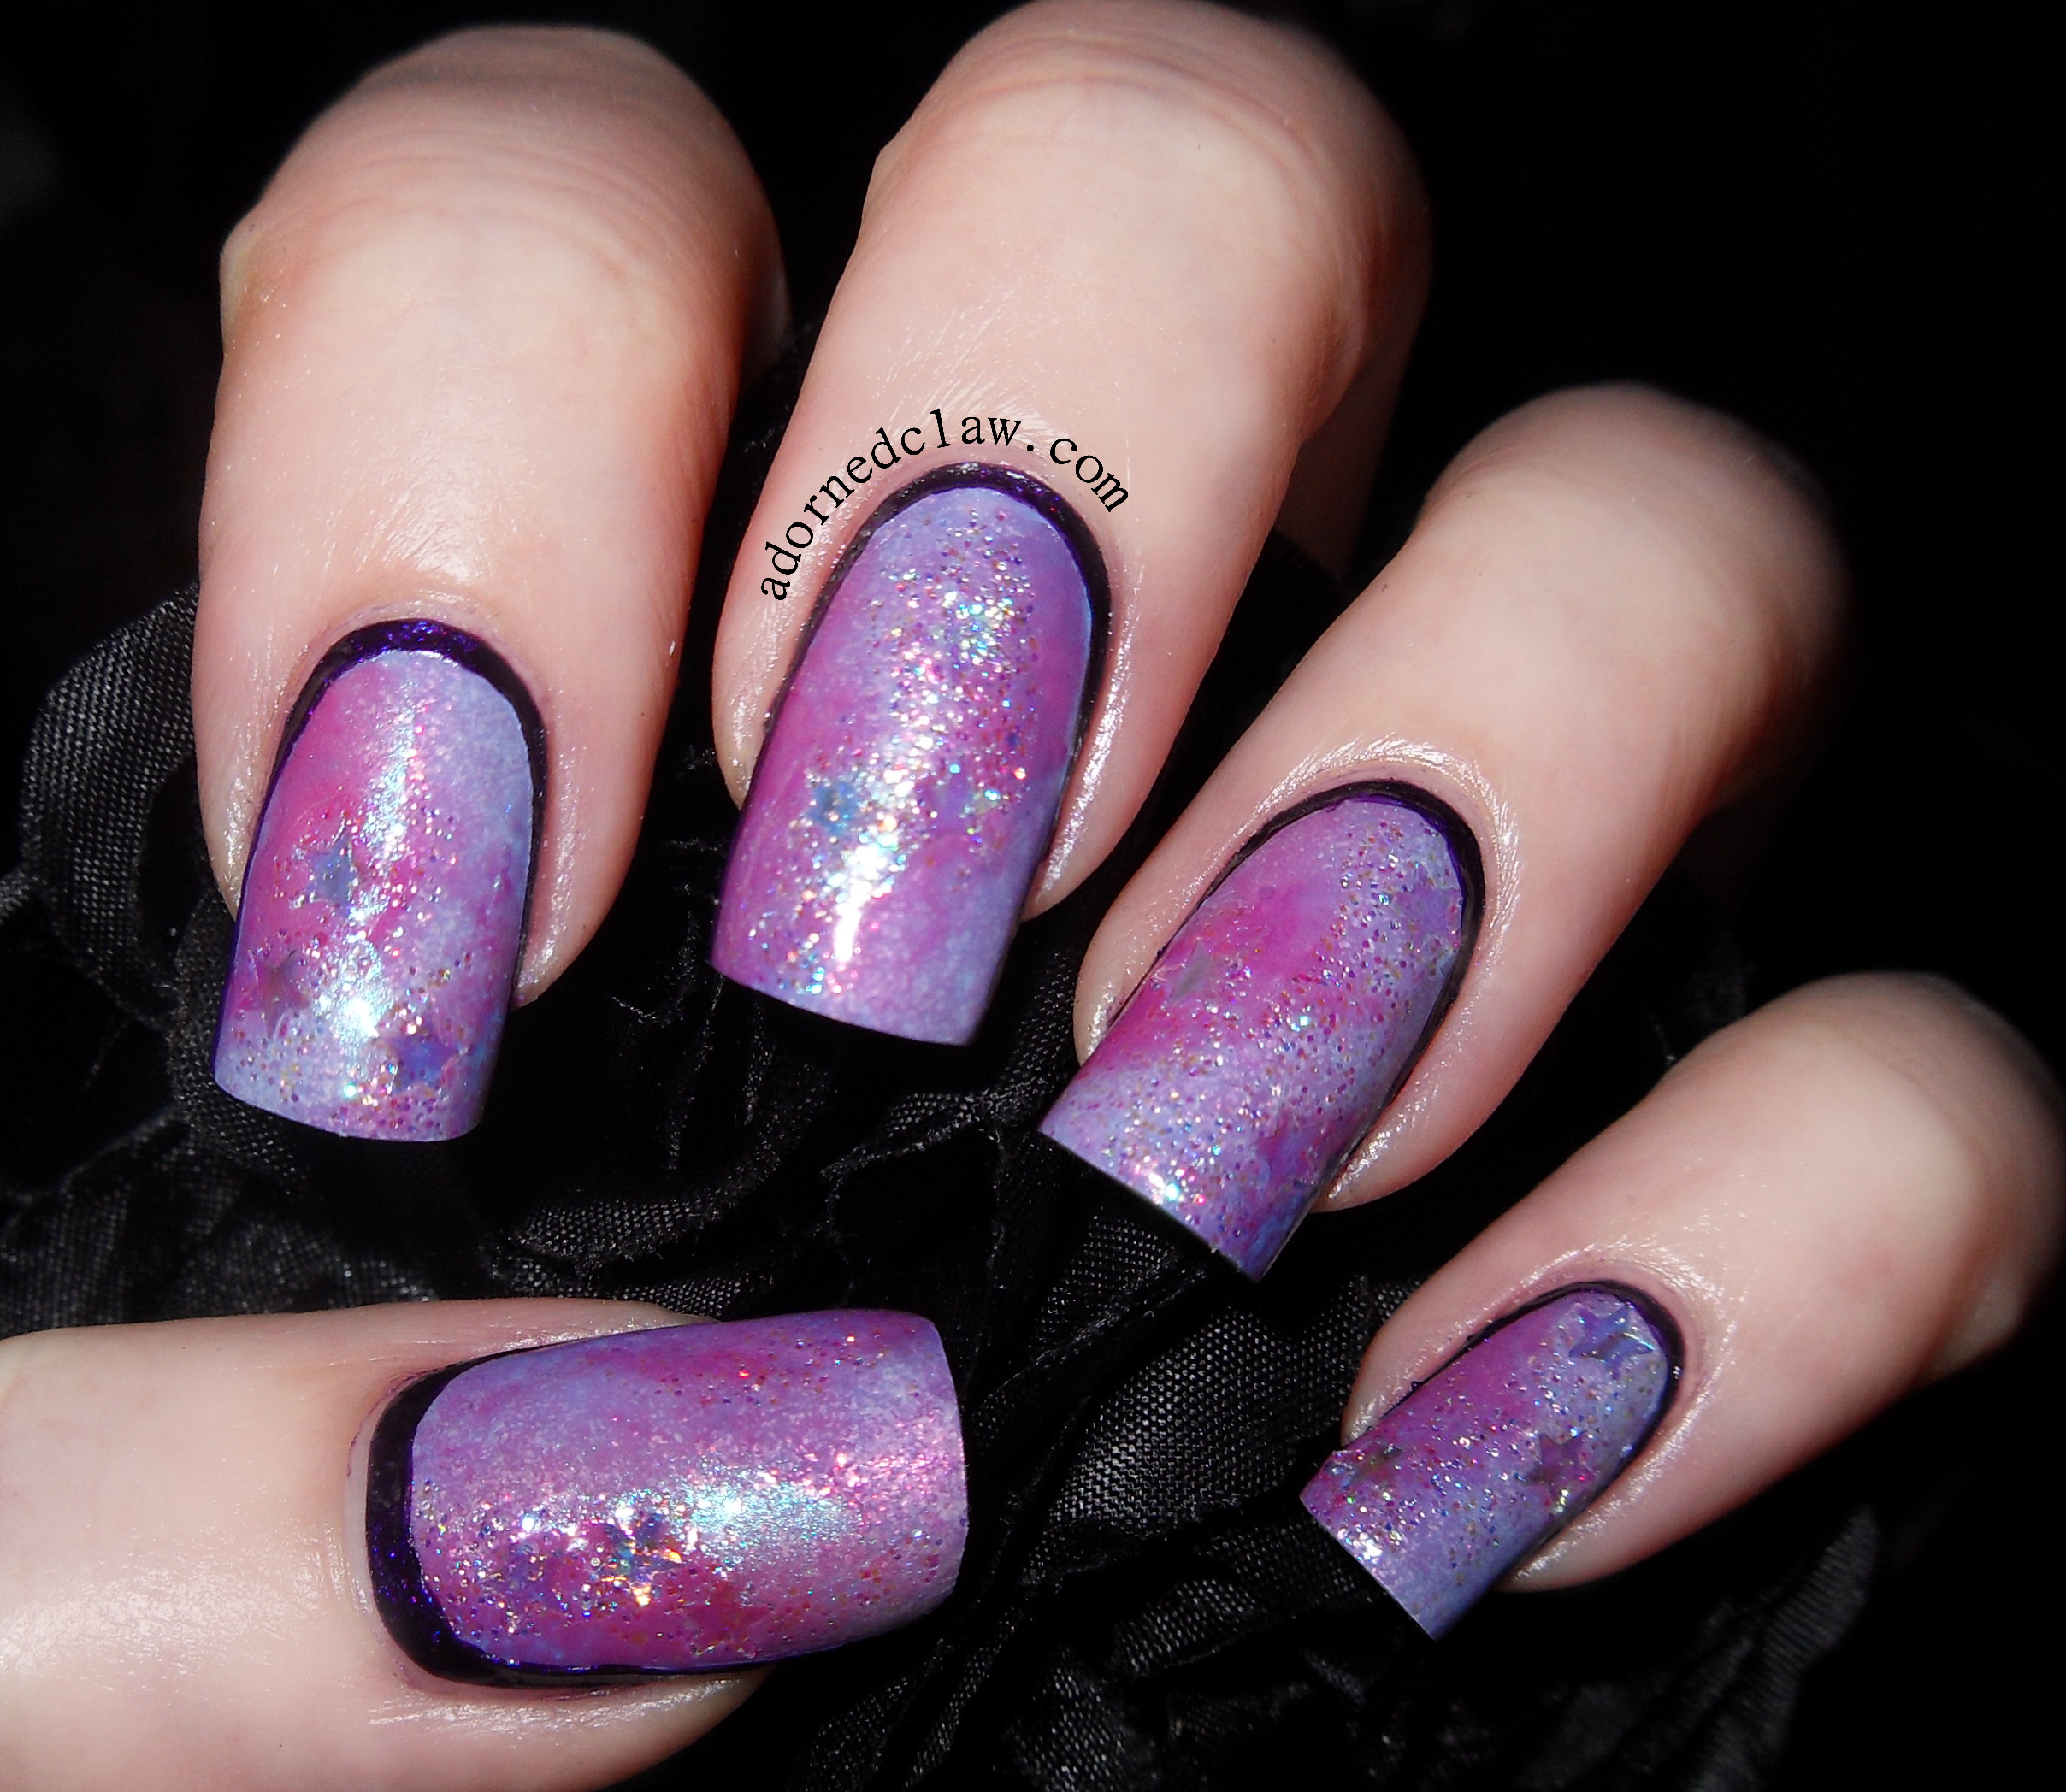 Water You Doing? - Holographic Indie Nail Polish by Cupcake Polish